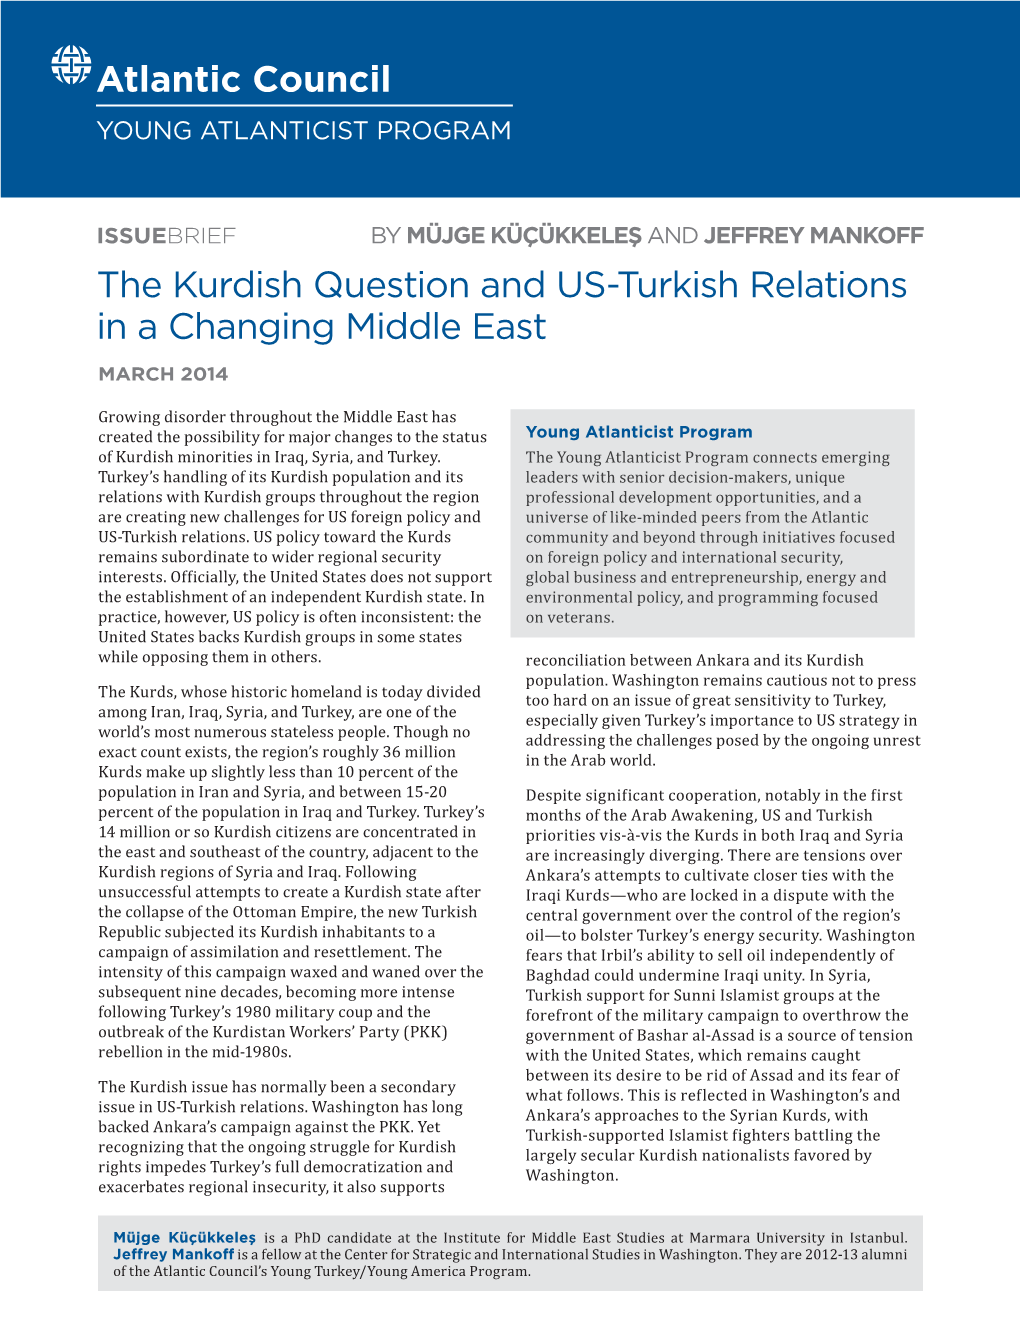 The Kurdish Question and US-Turkish Relations in a Changing Middle East